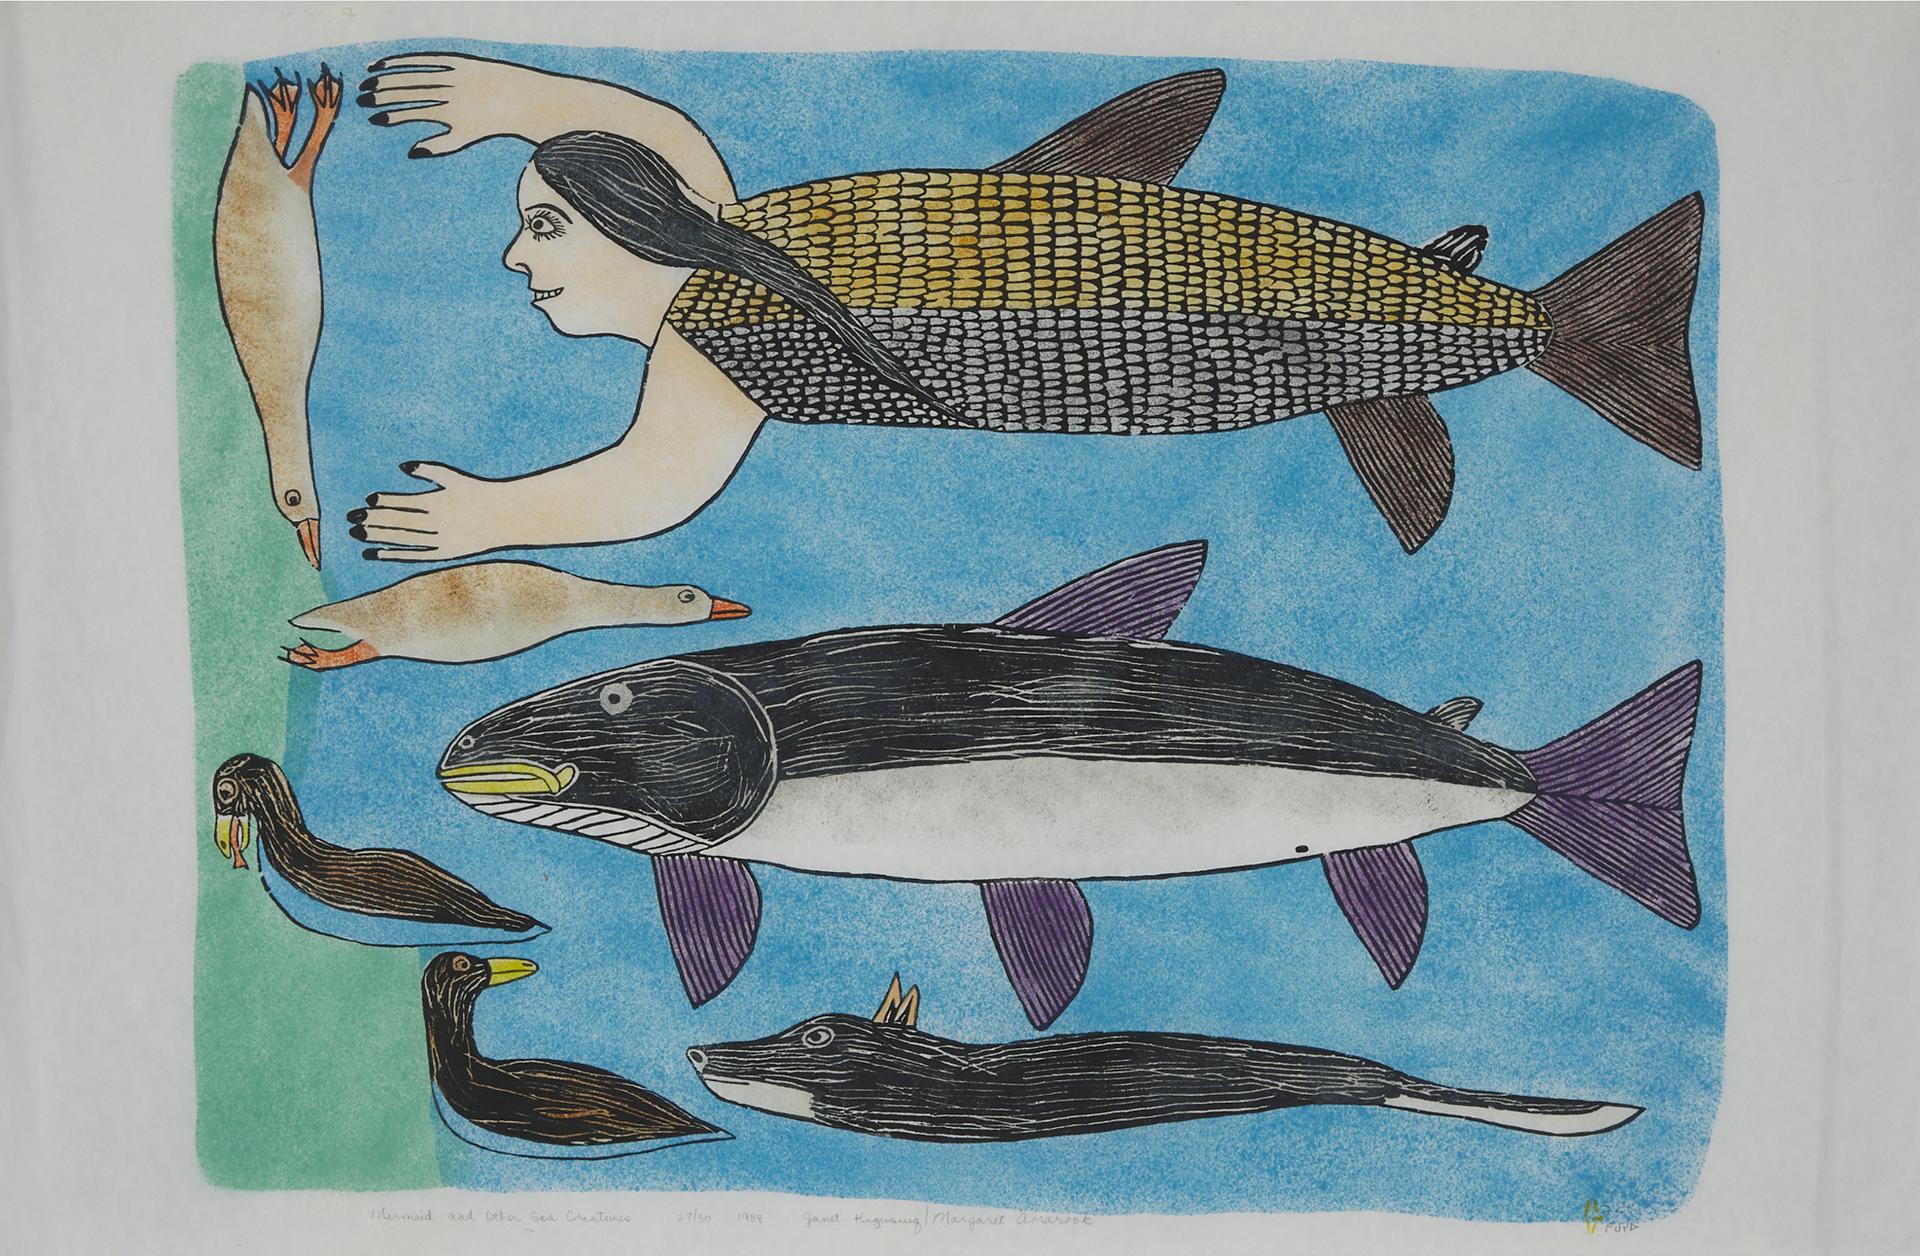 Janet Kigusiuq (1926-2005) - Mermaid And Other Sea Creatures